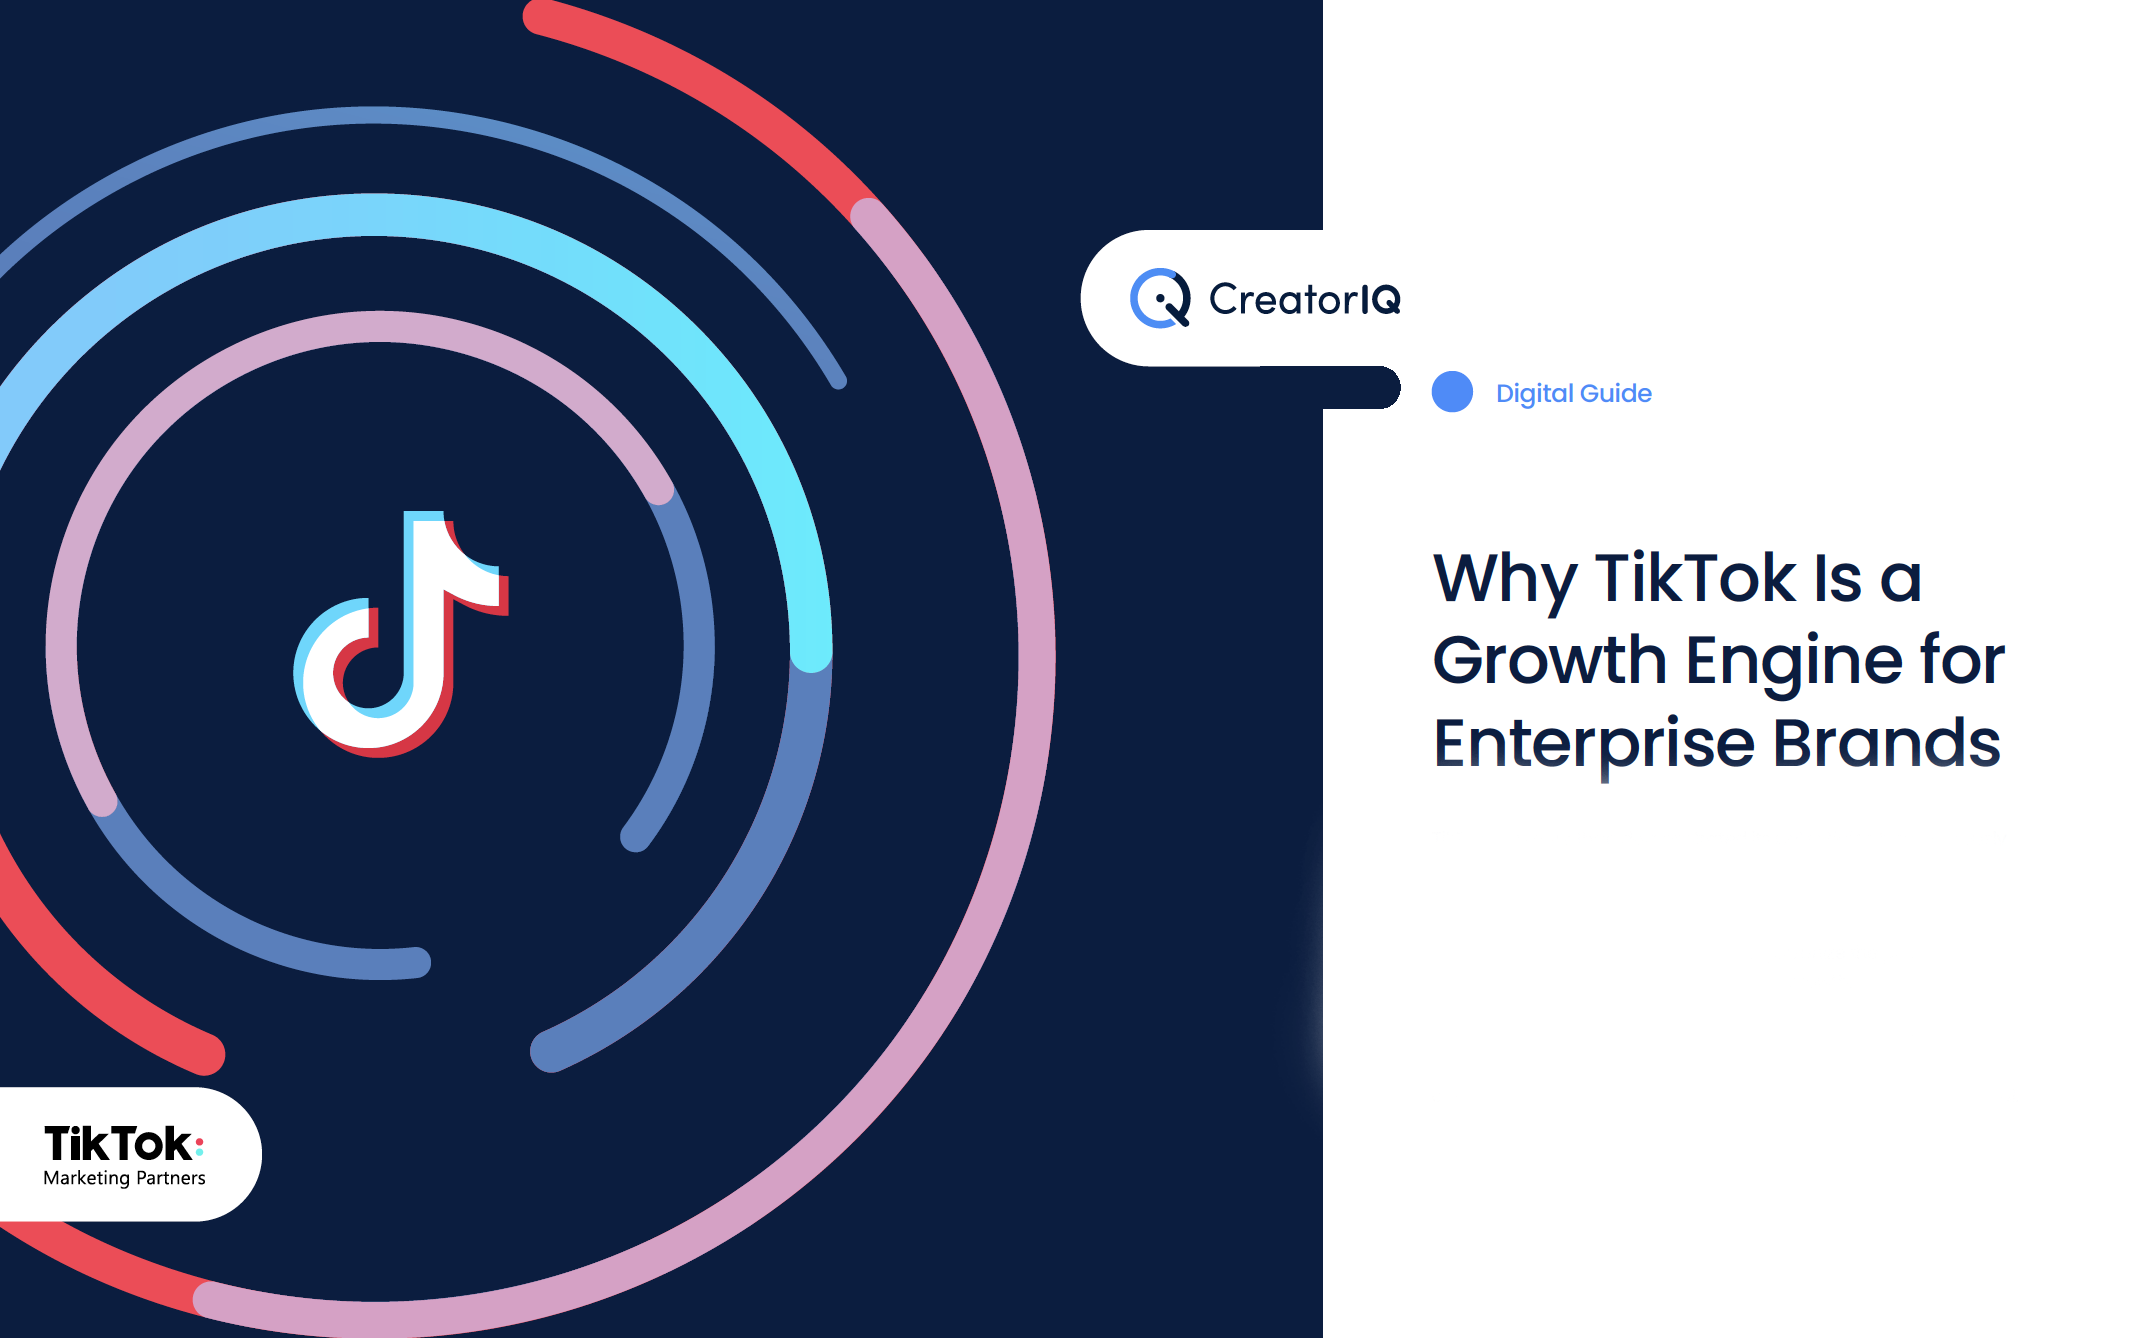 Why TikTok Is a Growth Engine for Enterprise Brands